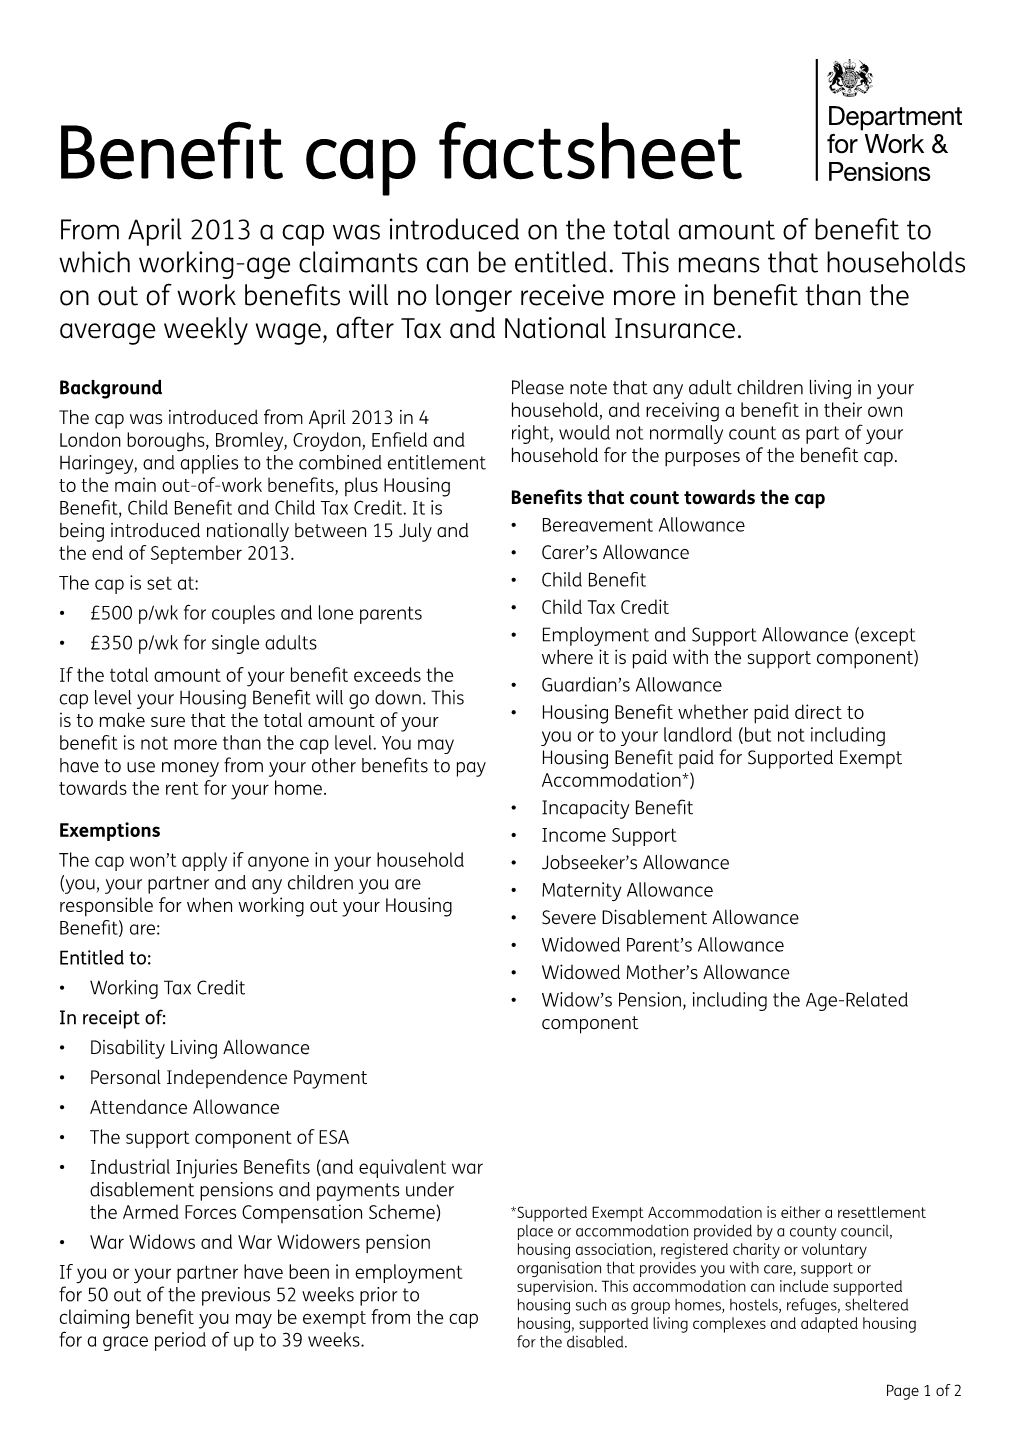 Benefit Cap Factsheet from April 2013 a Cap Was Introduced on the Total Amount of Benefit to Which Working-Age Claimants Can Be Entitled